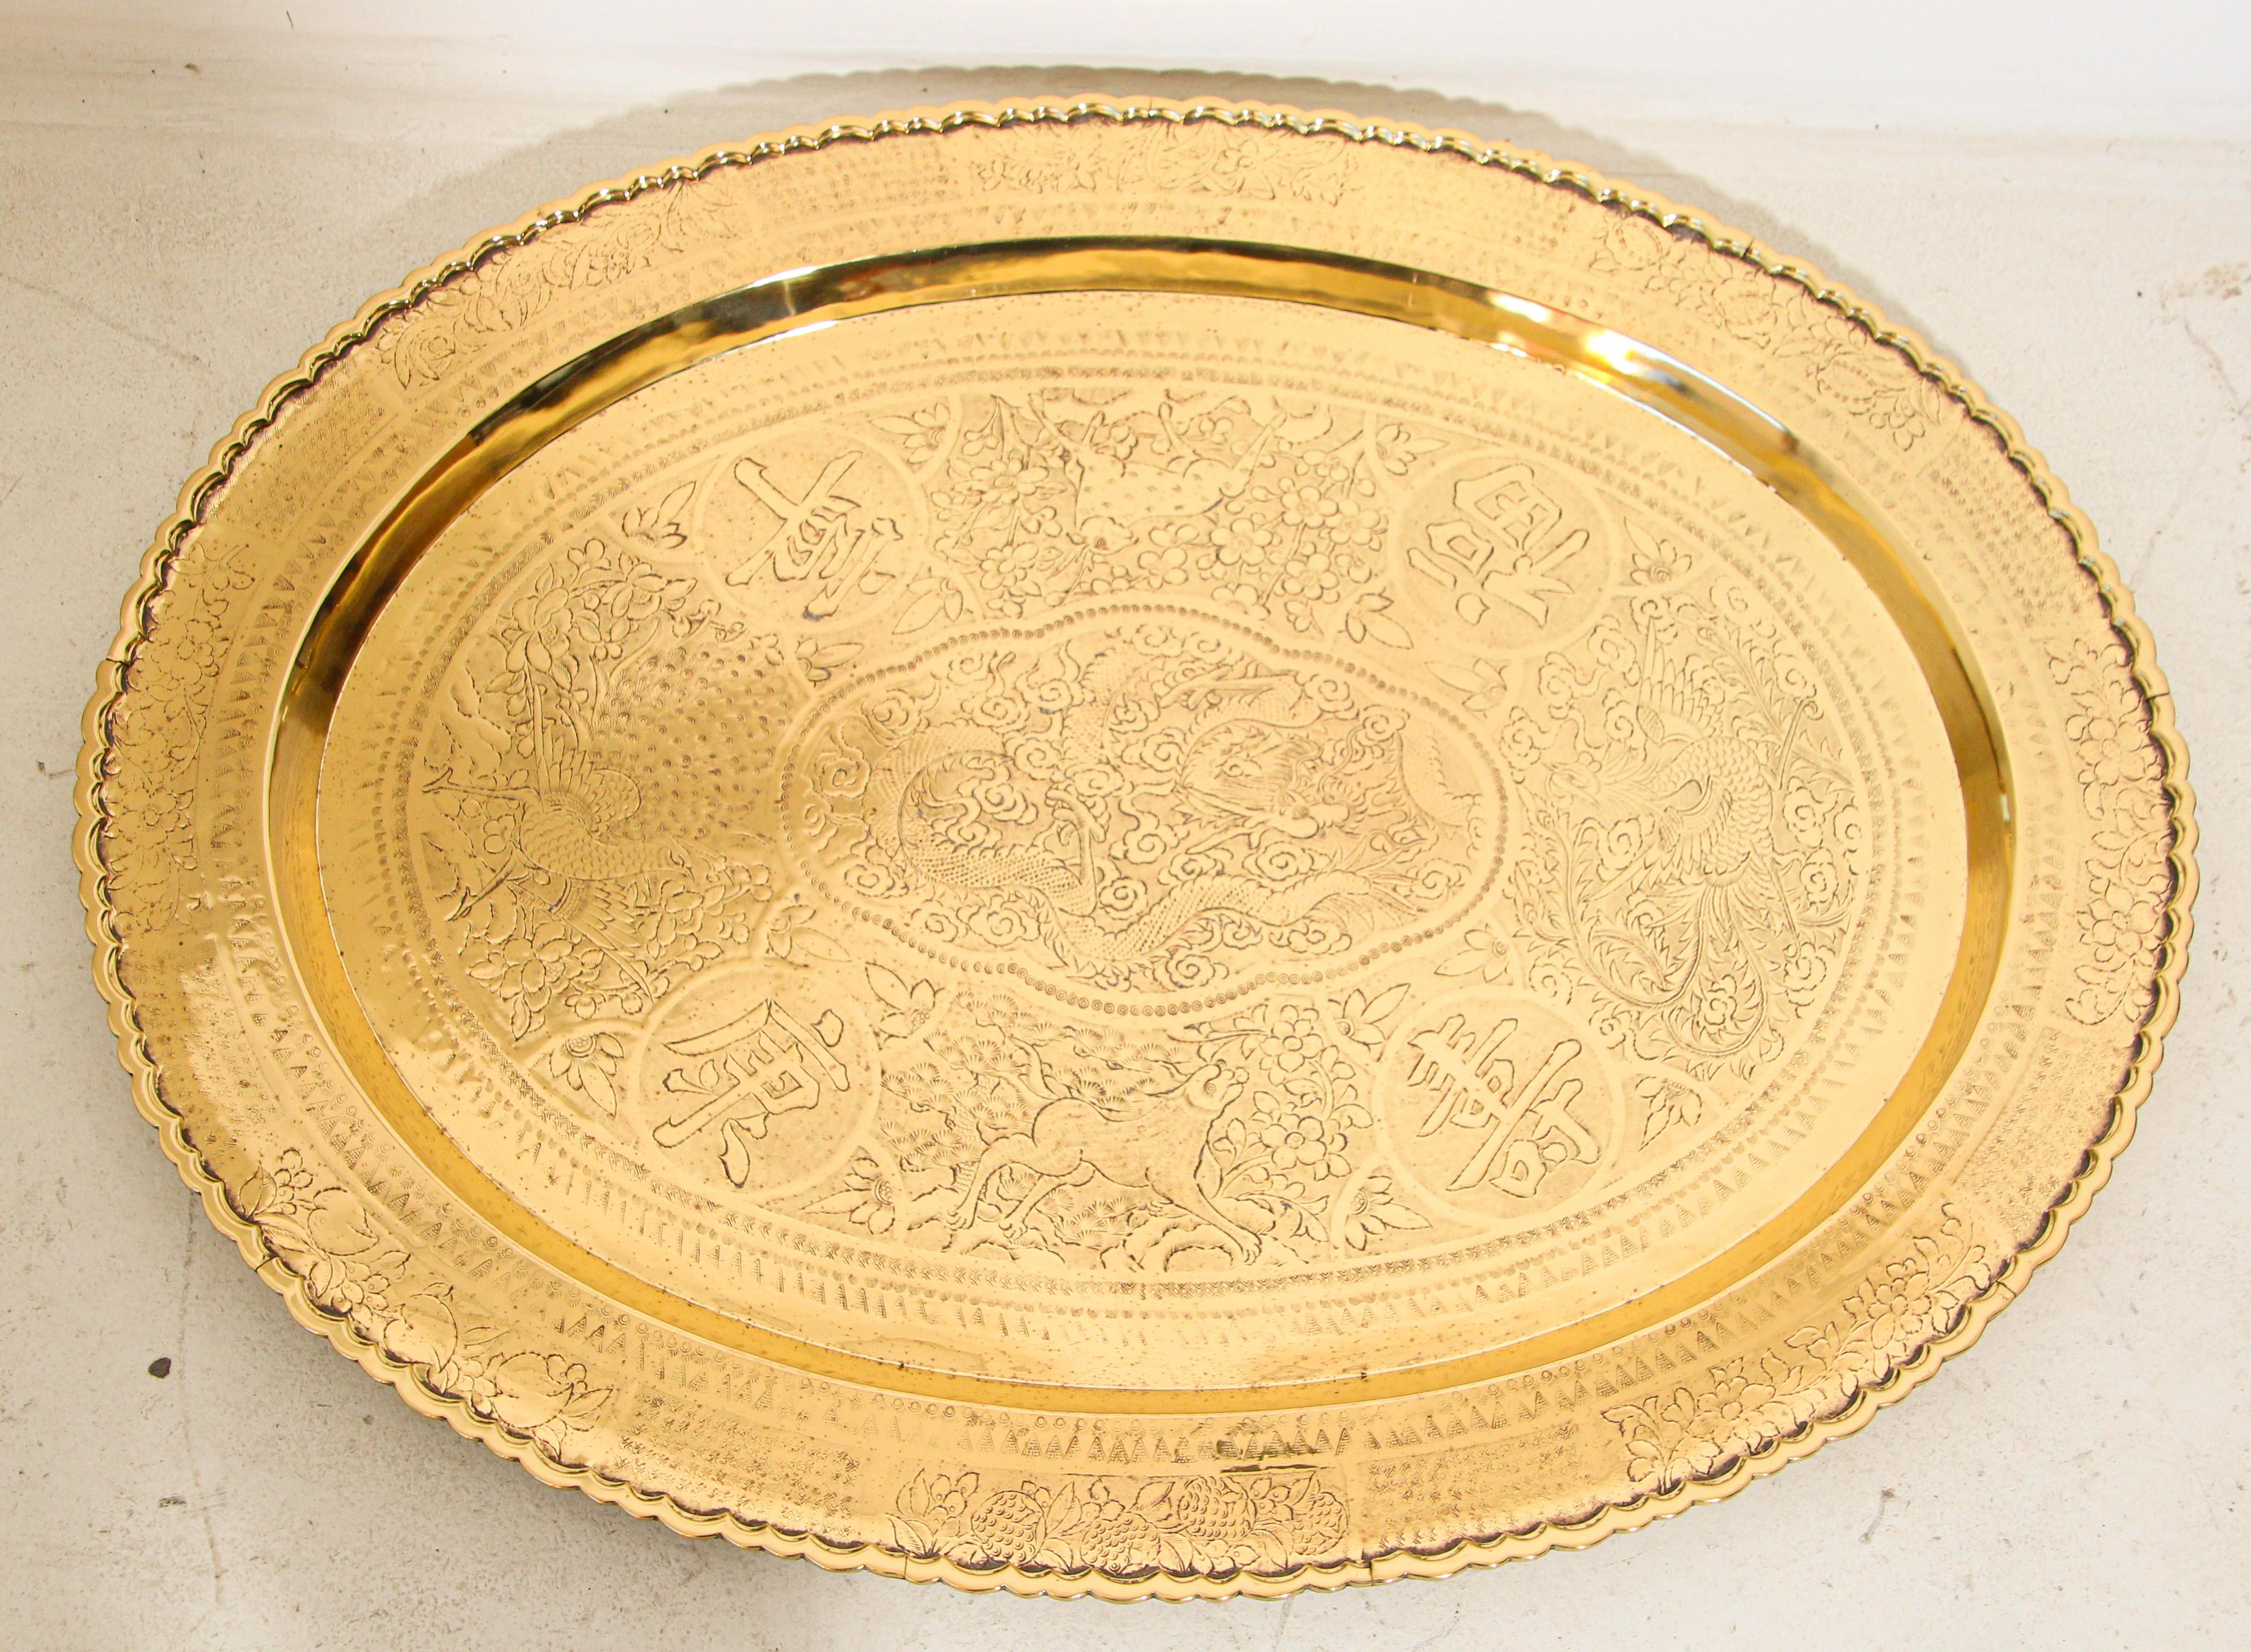 Asian Chinese imports oval metal brass tray, hammered and chiseled, engraved with dragons and different scenes of wild animals, ancient pagodas homes and foliage there are also Chinese calligraphy writing all around.
Handmade in Hong Kong ,large